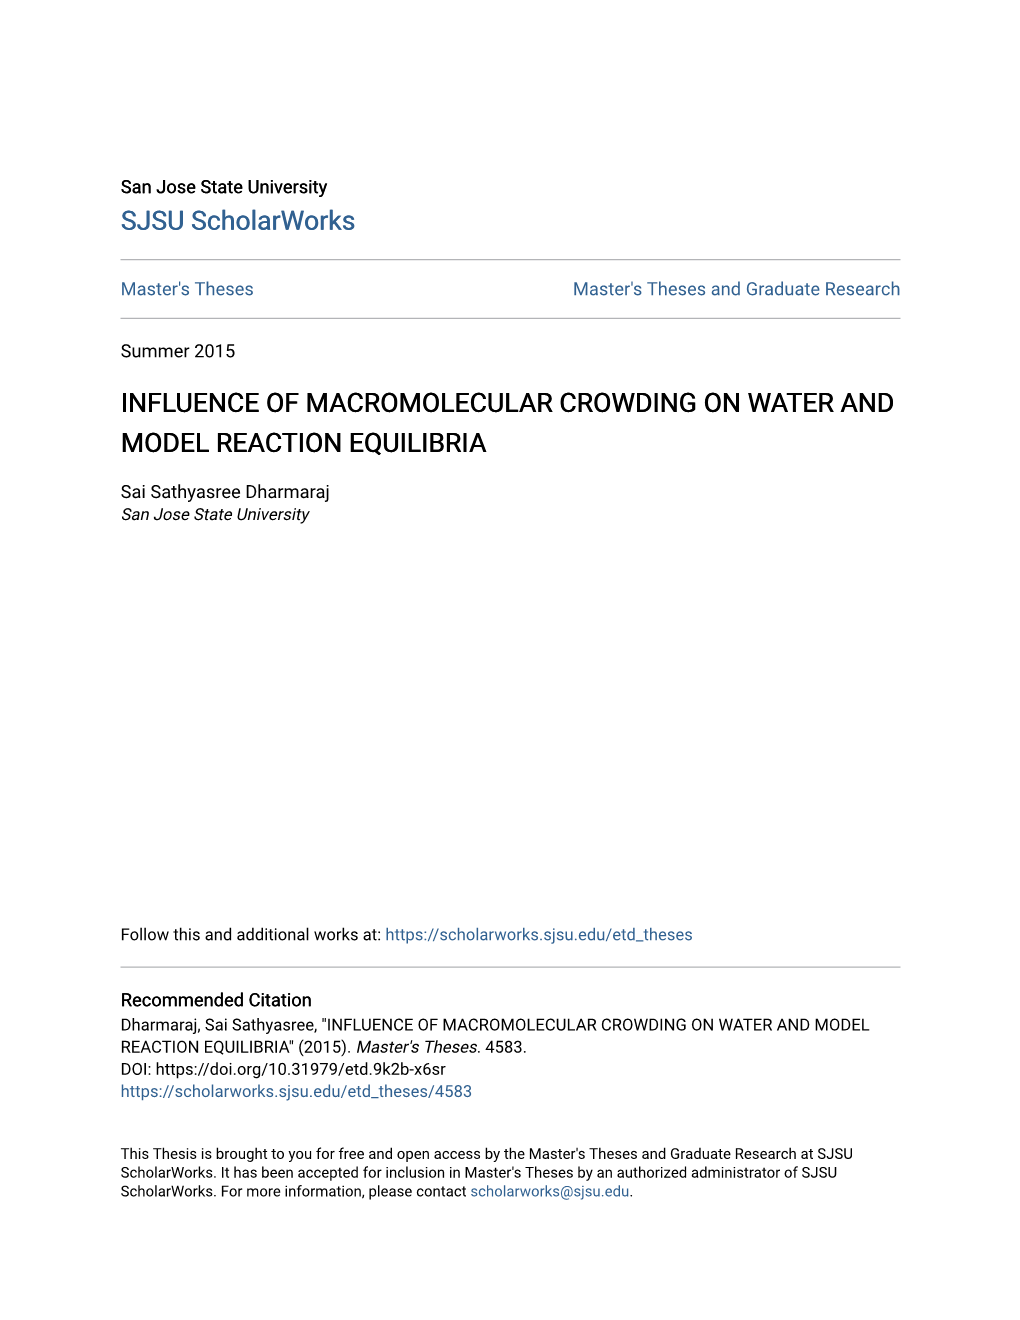 Influence of Macromolecular Crowding on Water and Model Reaction Equilibria